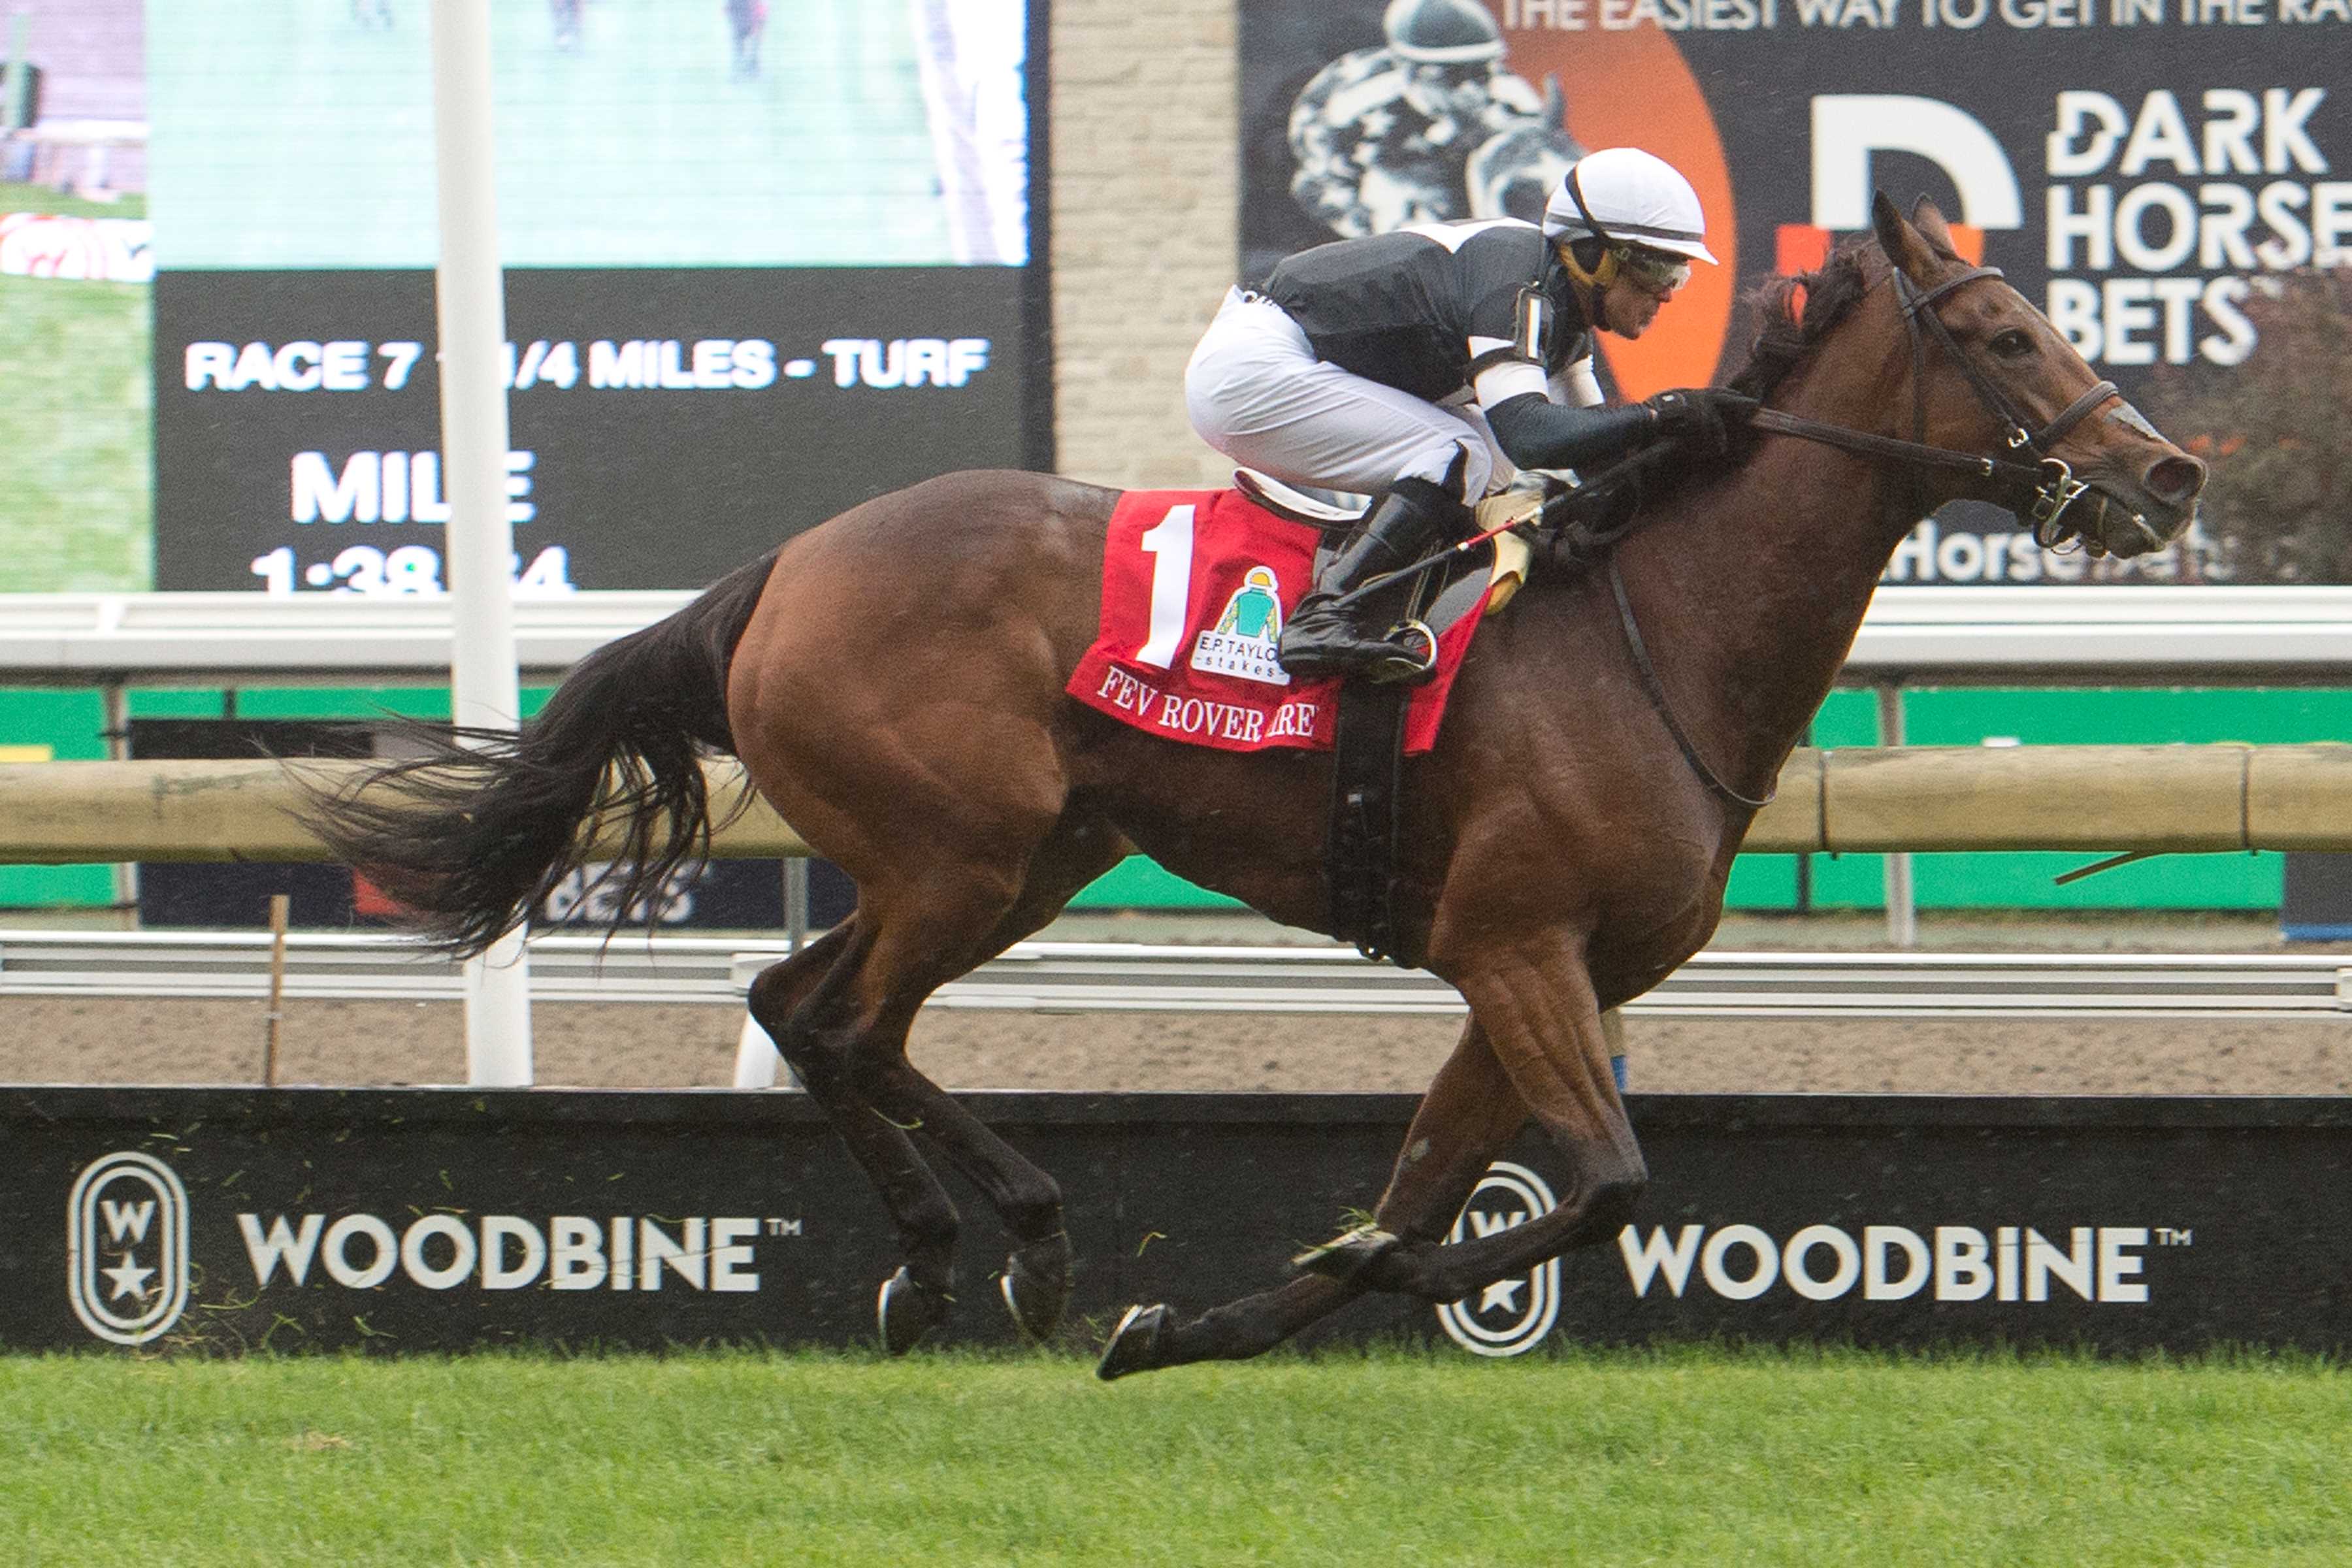 Reigning Canadian Horse of the Year Fev Rover (IRE) goes for second straight Grade 2 Nassau score / Oceanic steps back into Grade 2 Highlander spotlight – Woodbine Racetrack